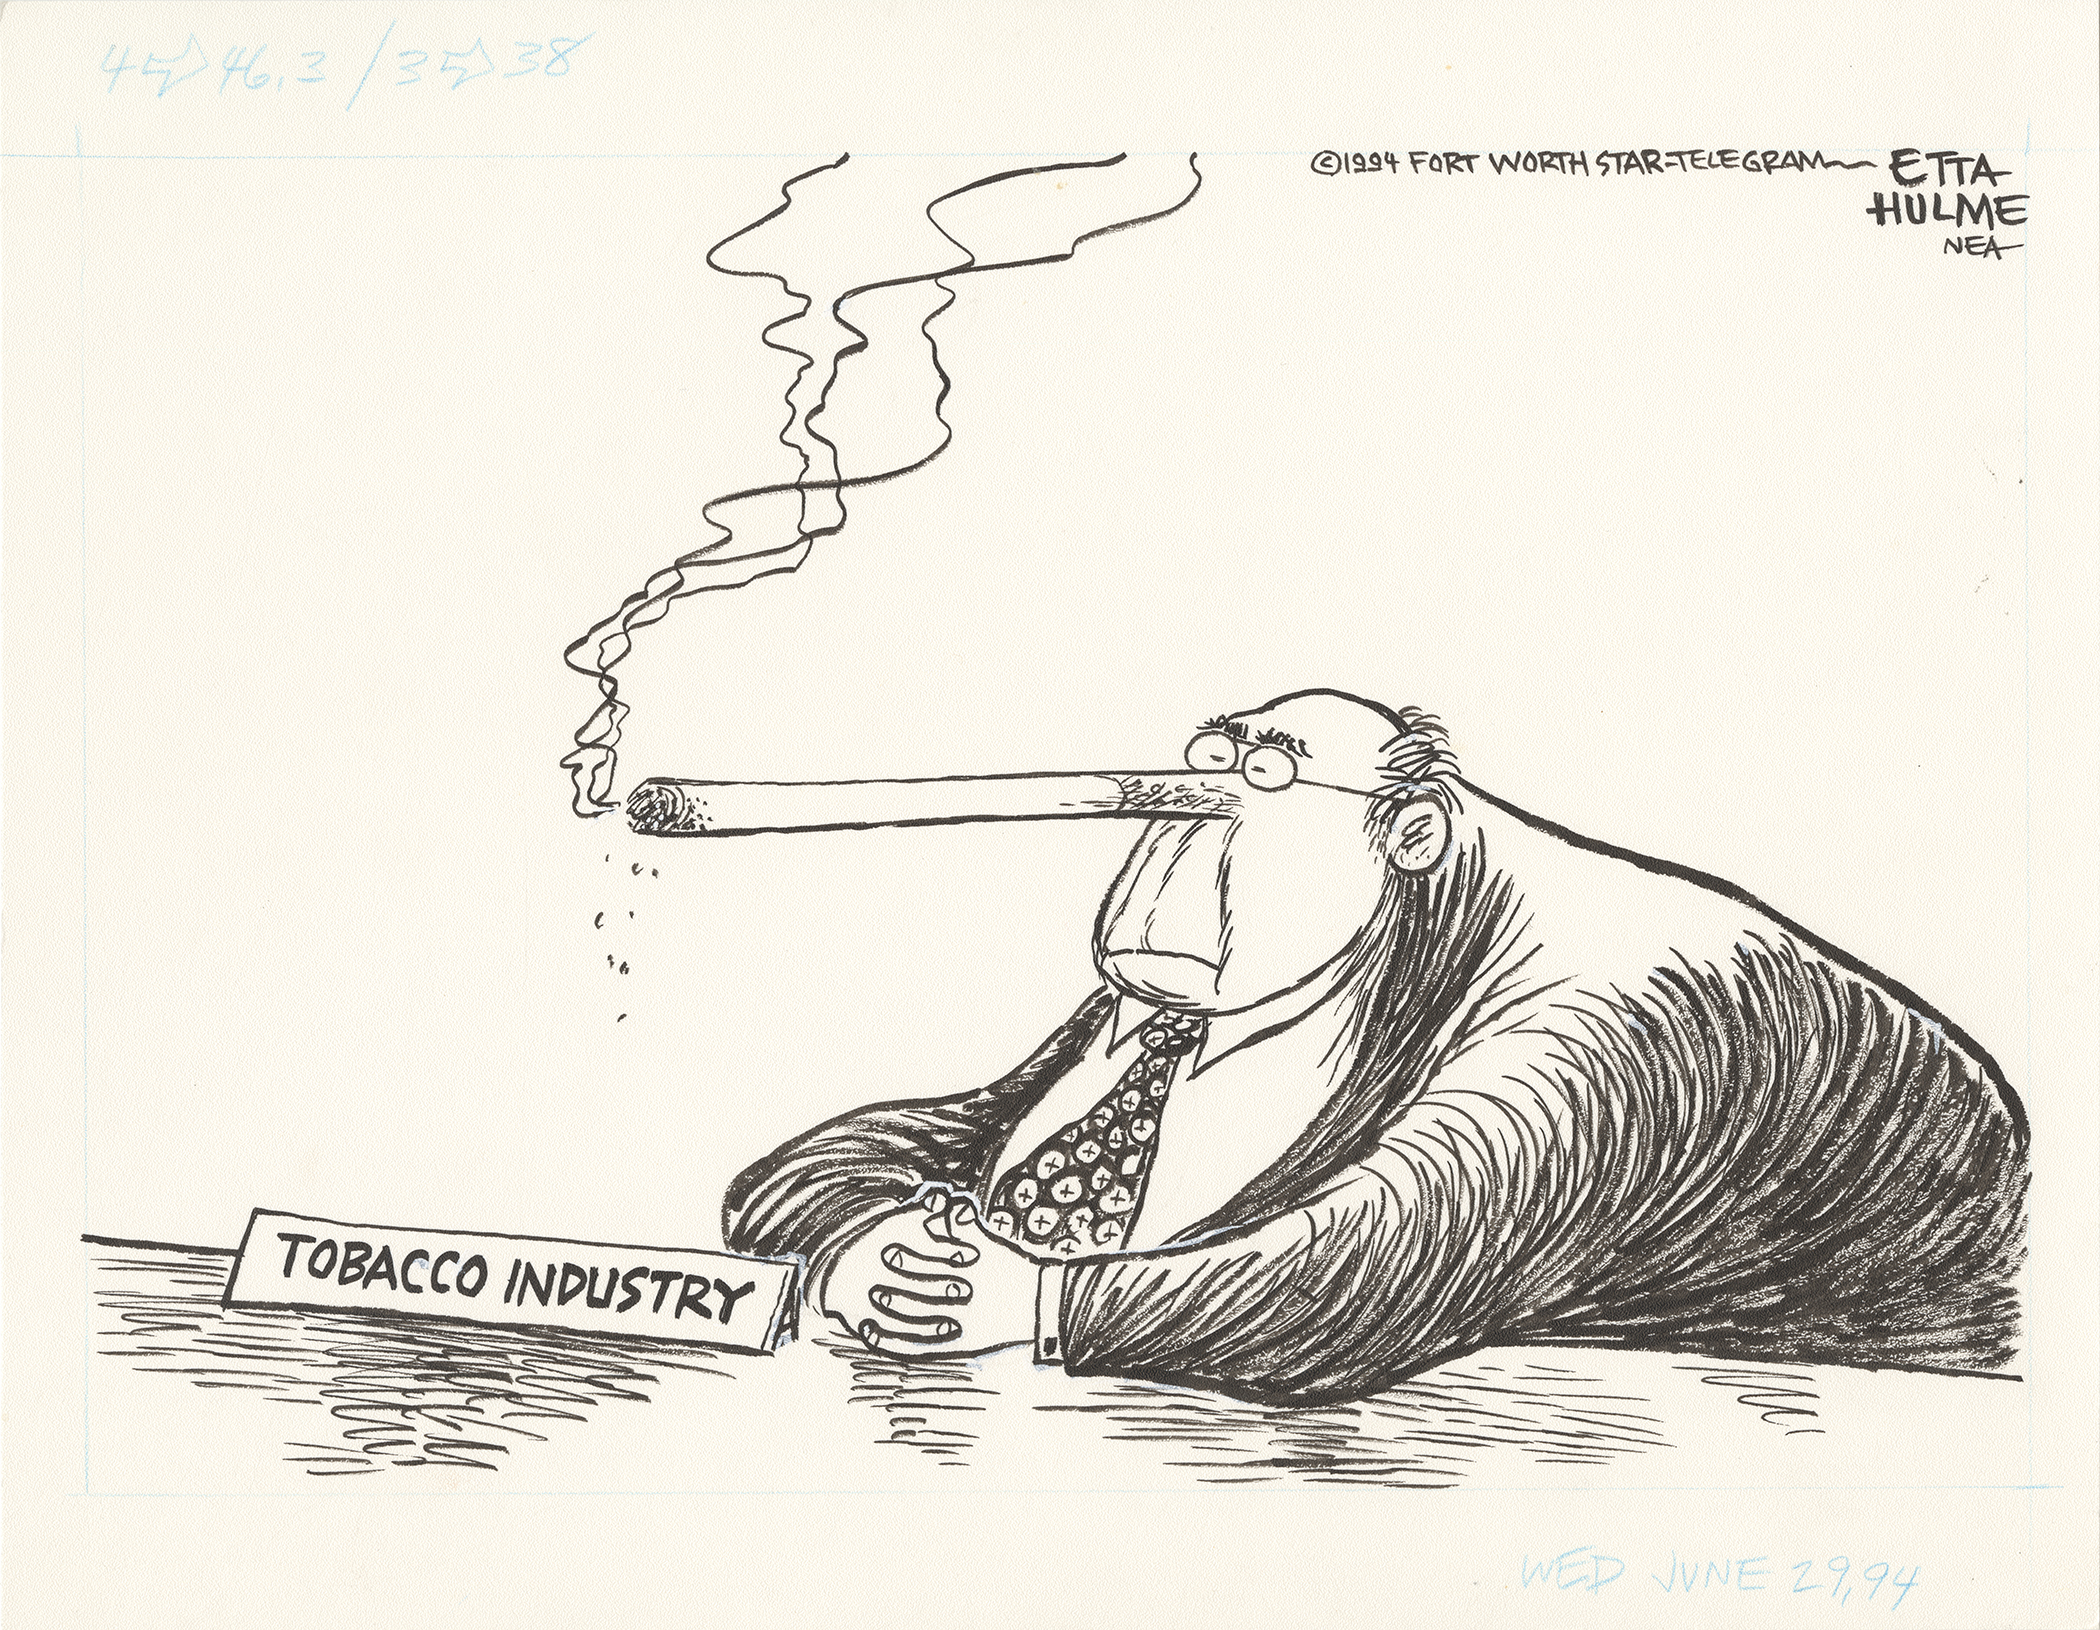 Tobacco industry